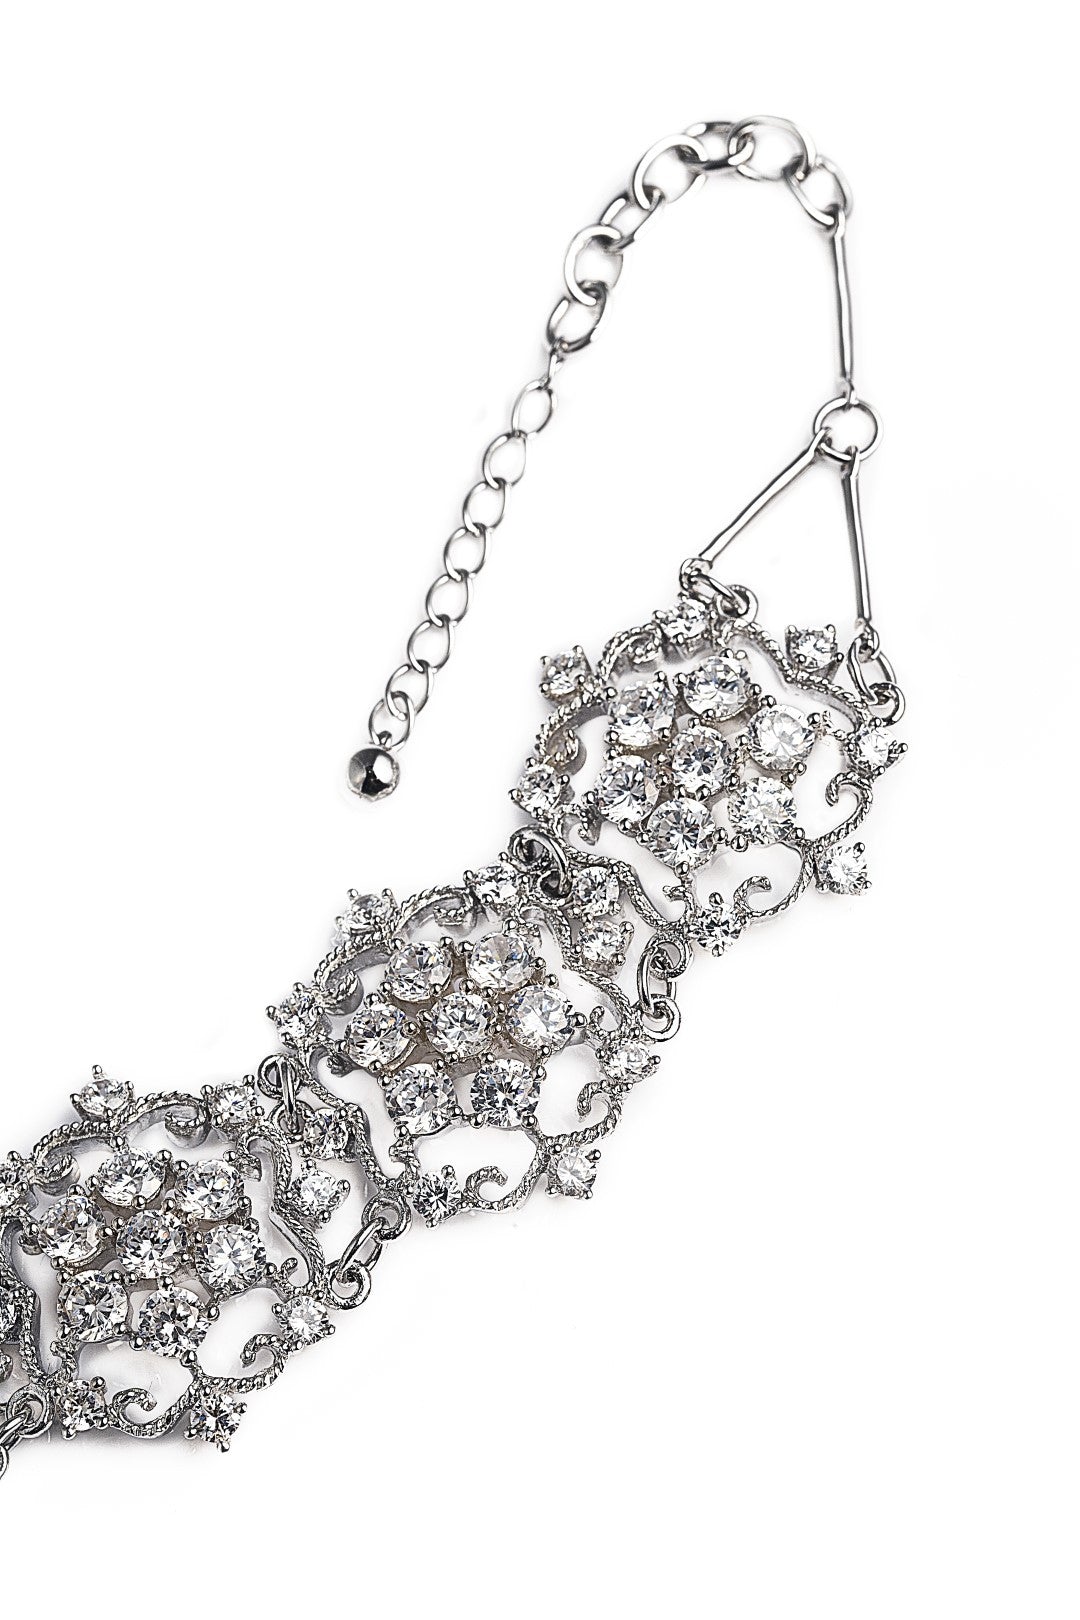 I Do Necklace in 925 sterling silver and cubic zirconia. Bellagio & Co. Worldwide shipping